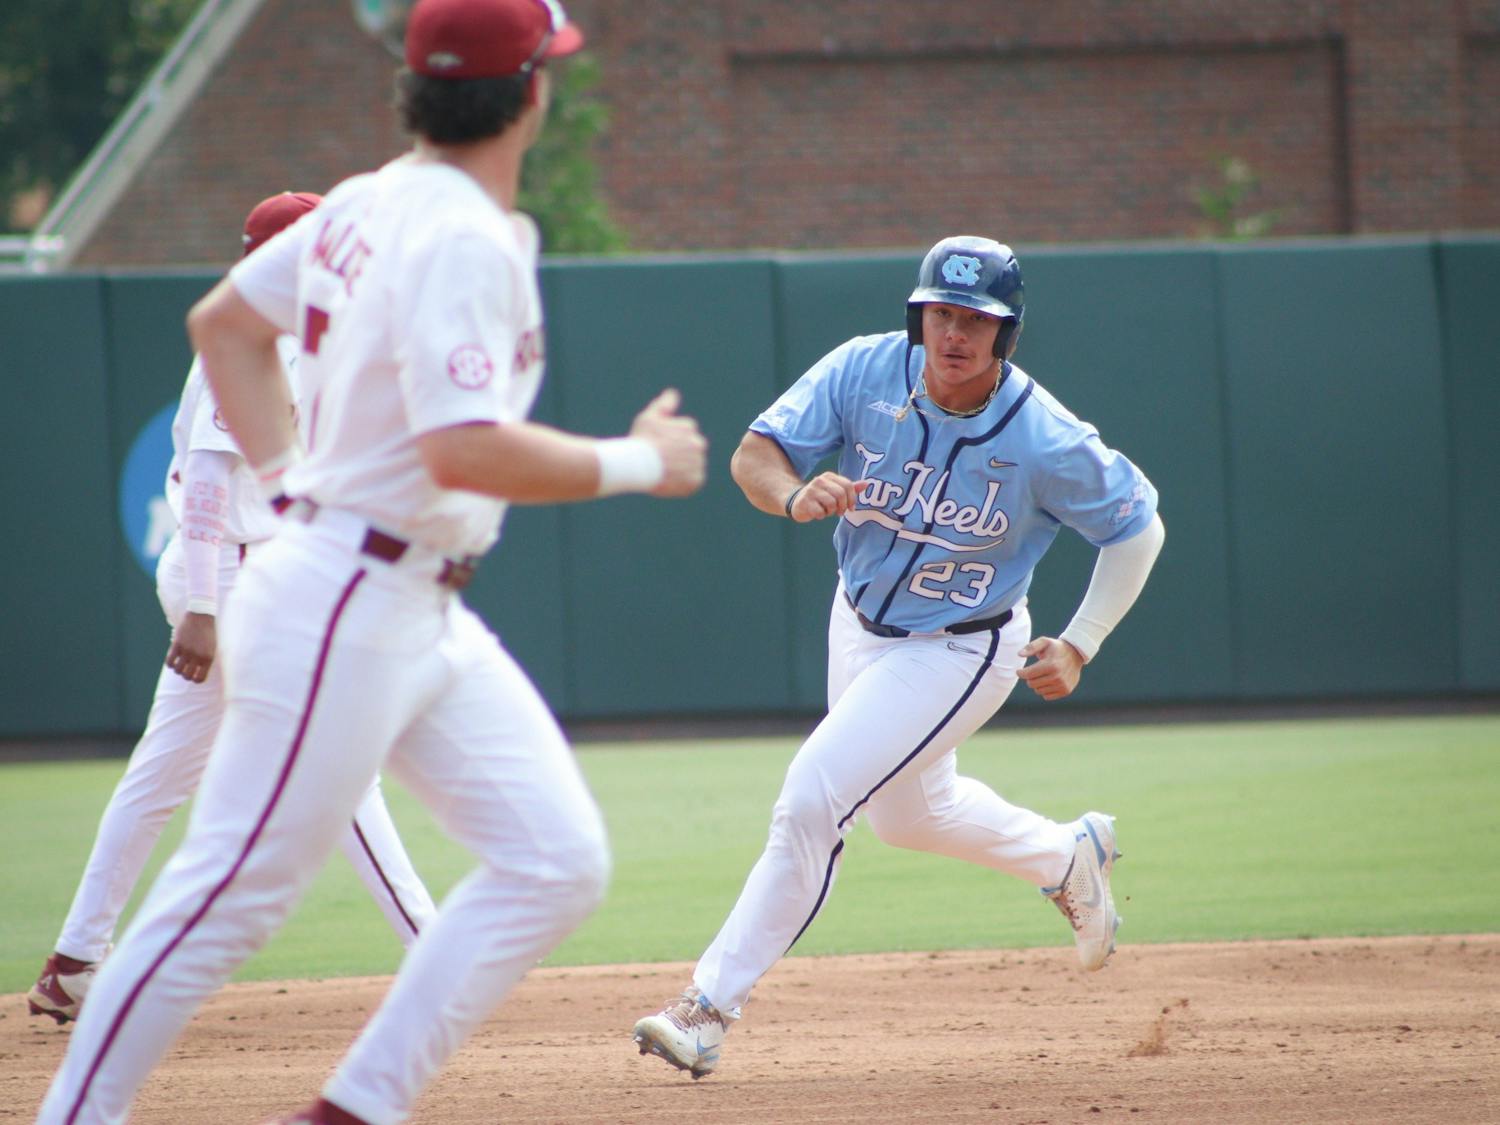 Sophomore designated hitter Alberto Osuna (23) runs towards third base after UNC gets a hit. UNC lost 3-4 against Arkansas at home in the NCAA Super Regionals on Sunday, June 12, 2022.